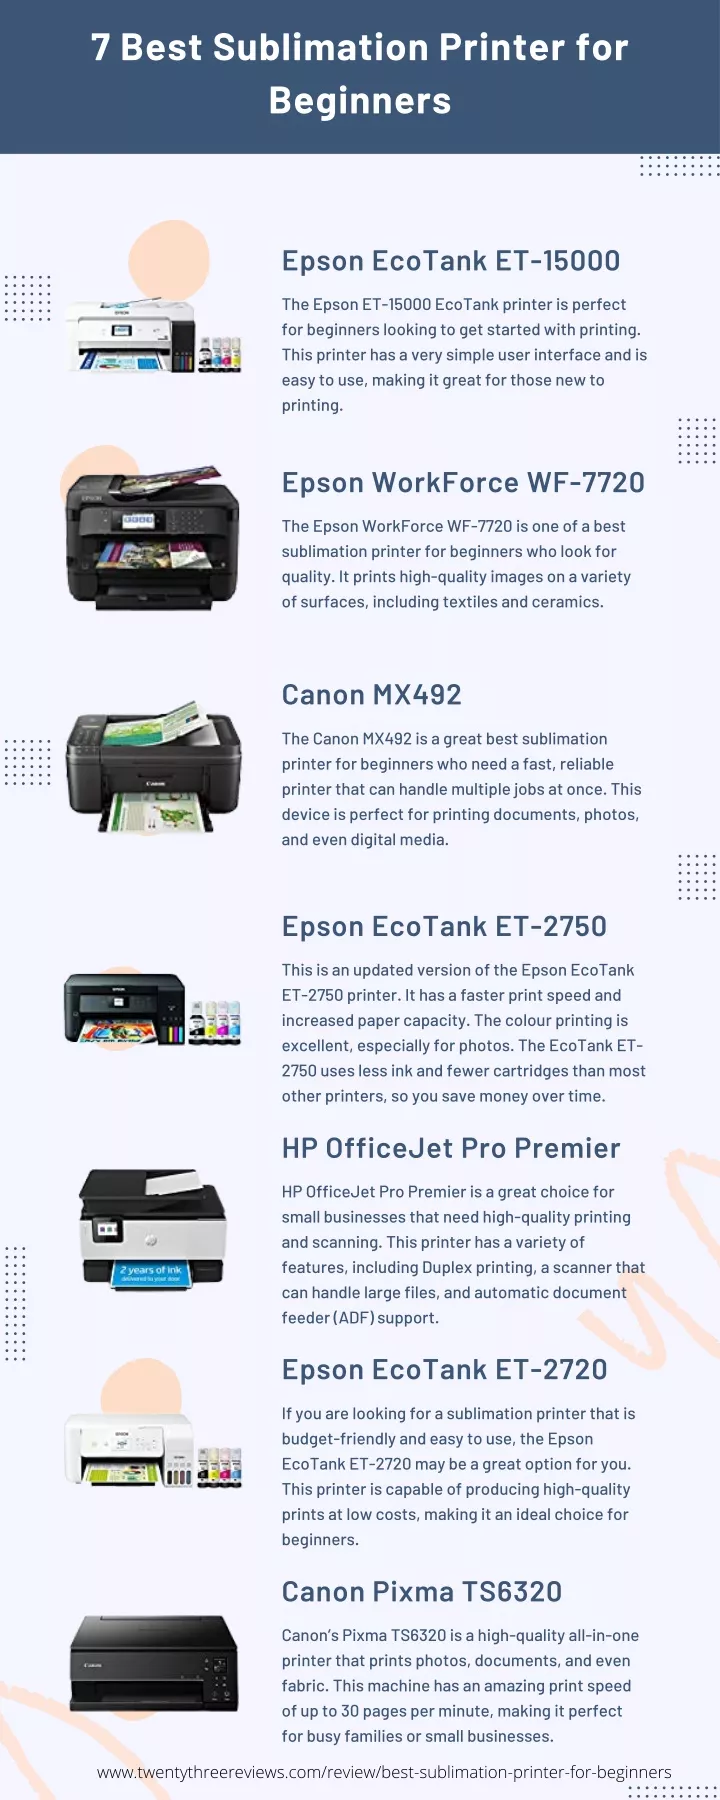 Ppt 7 Best Sublimation Printer For Beginners Powerpoint Presentation Id11449070 1440